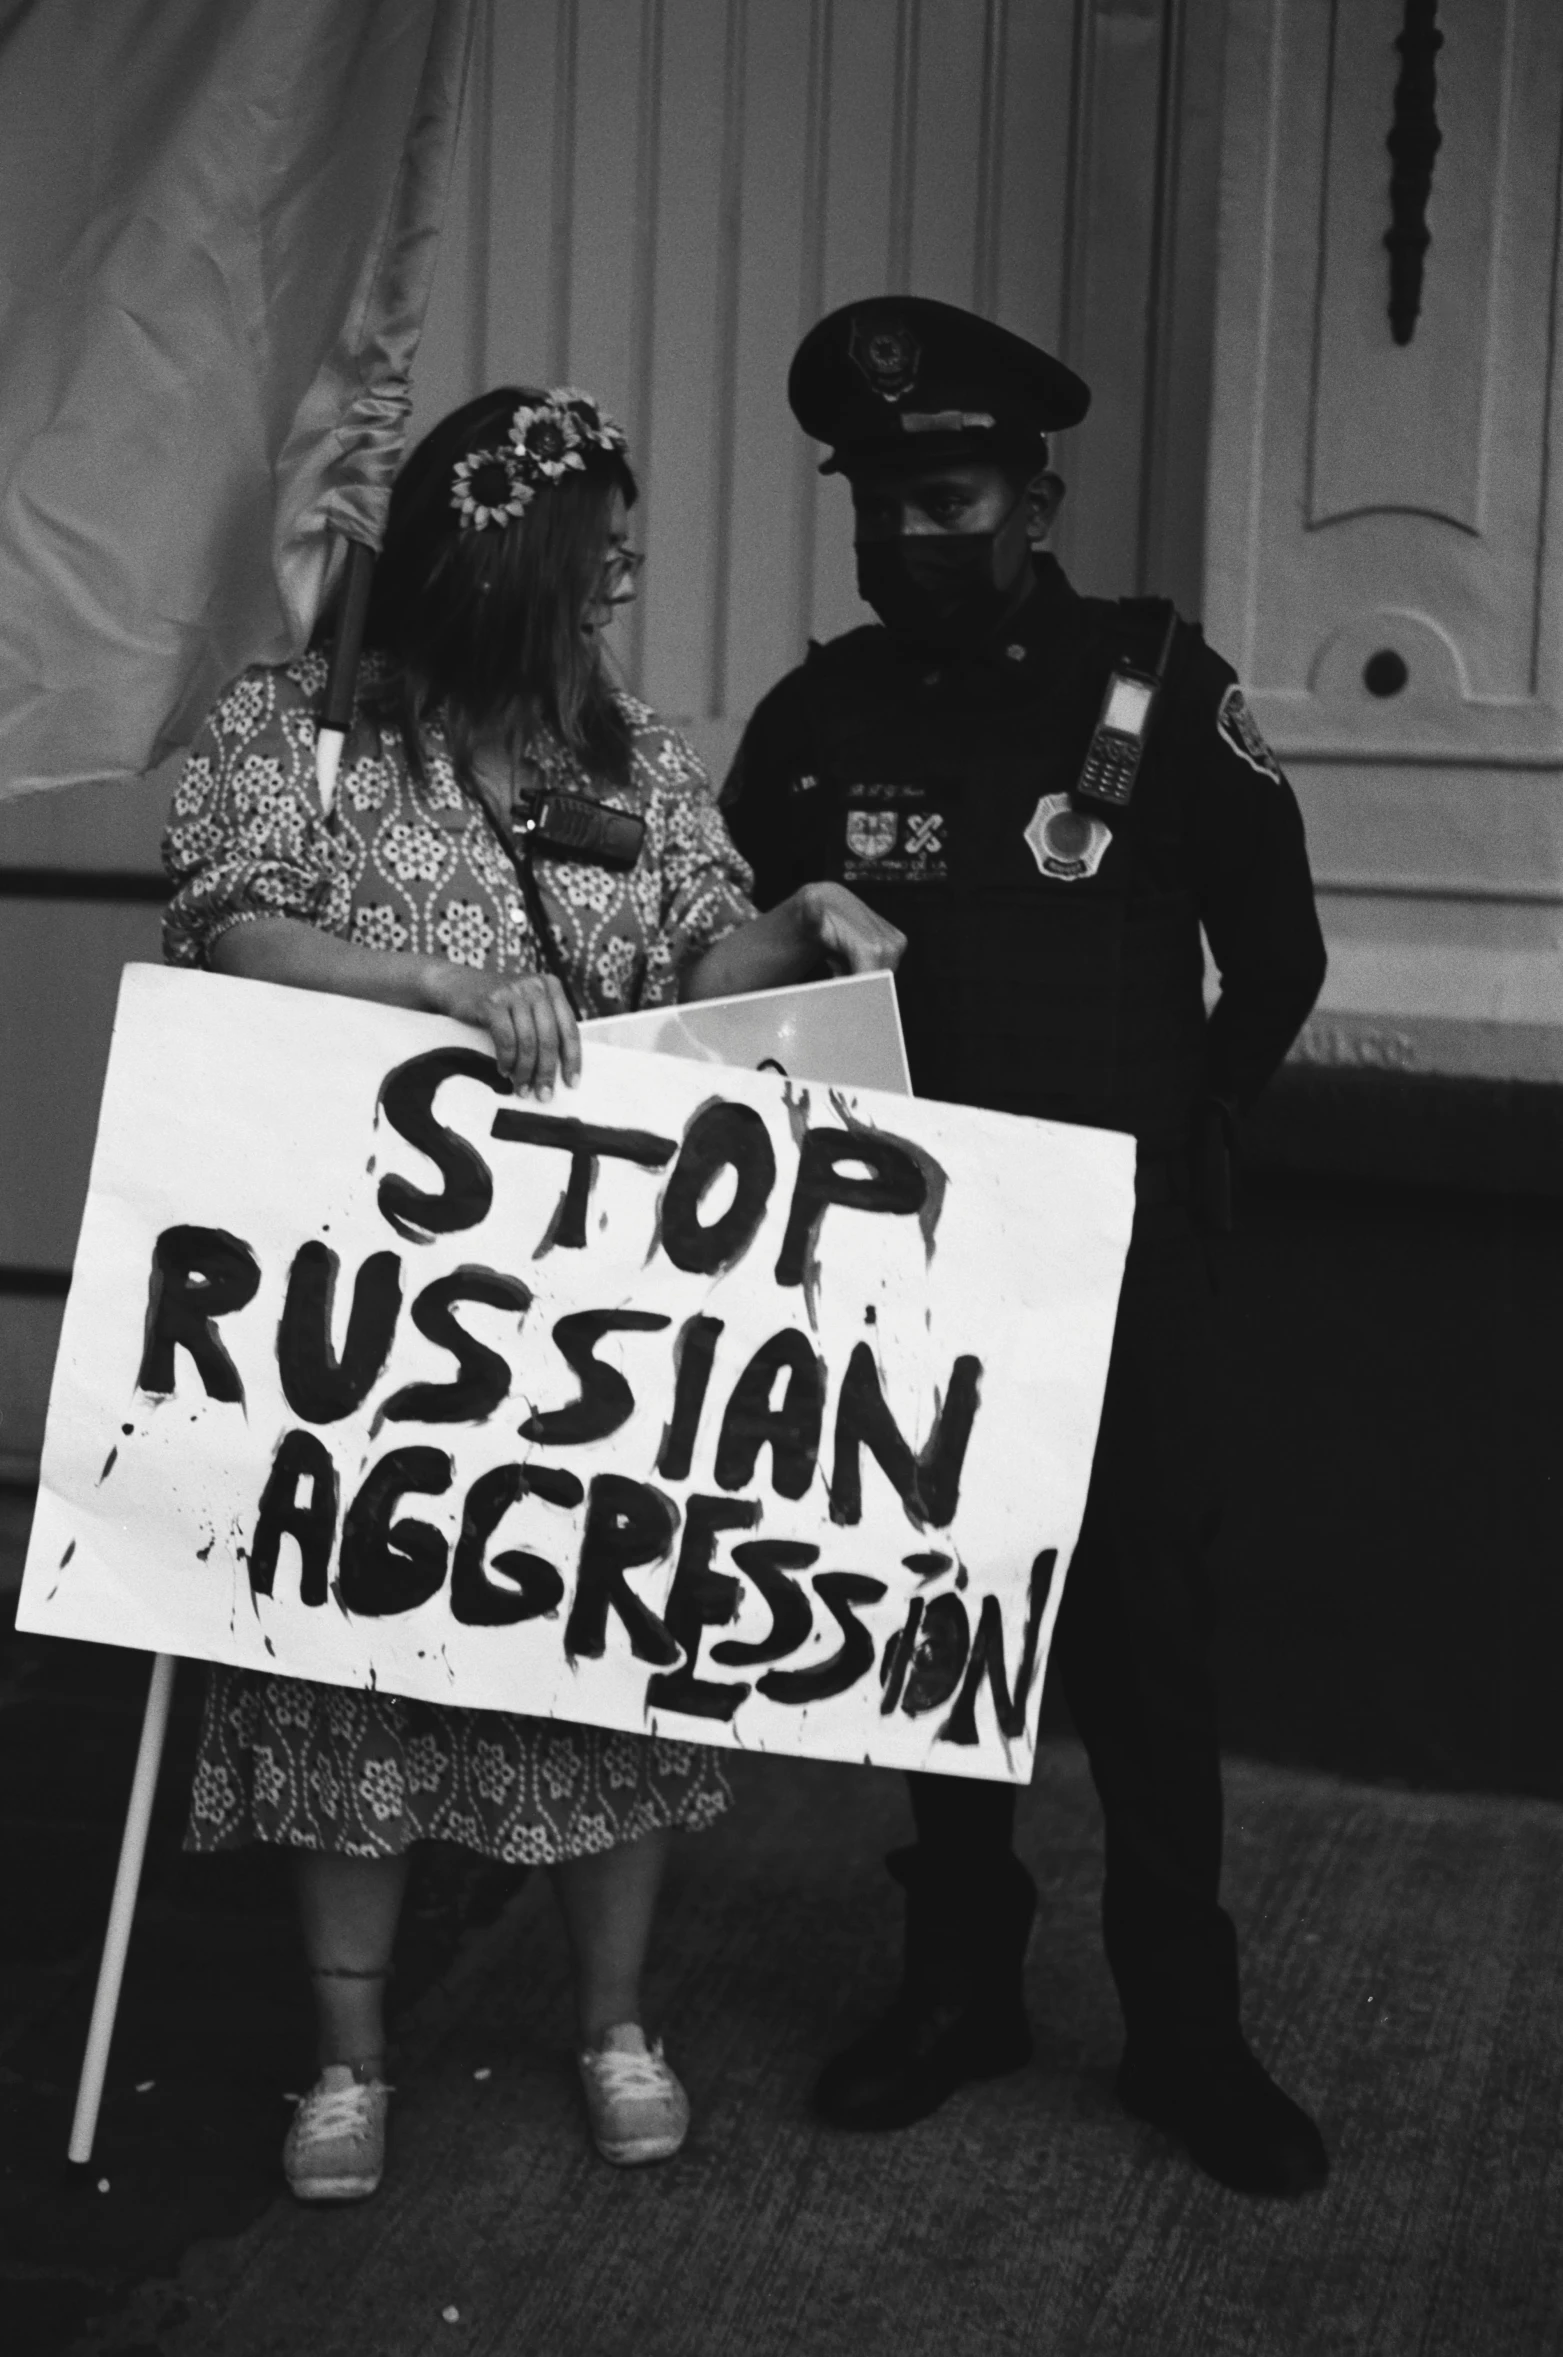 a man and woman holding a sign on stage